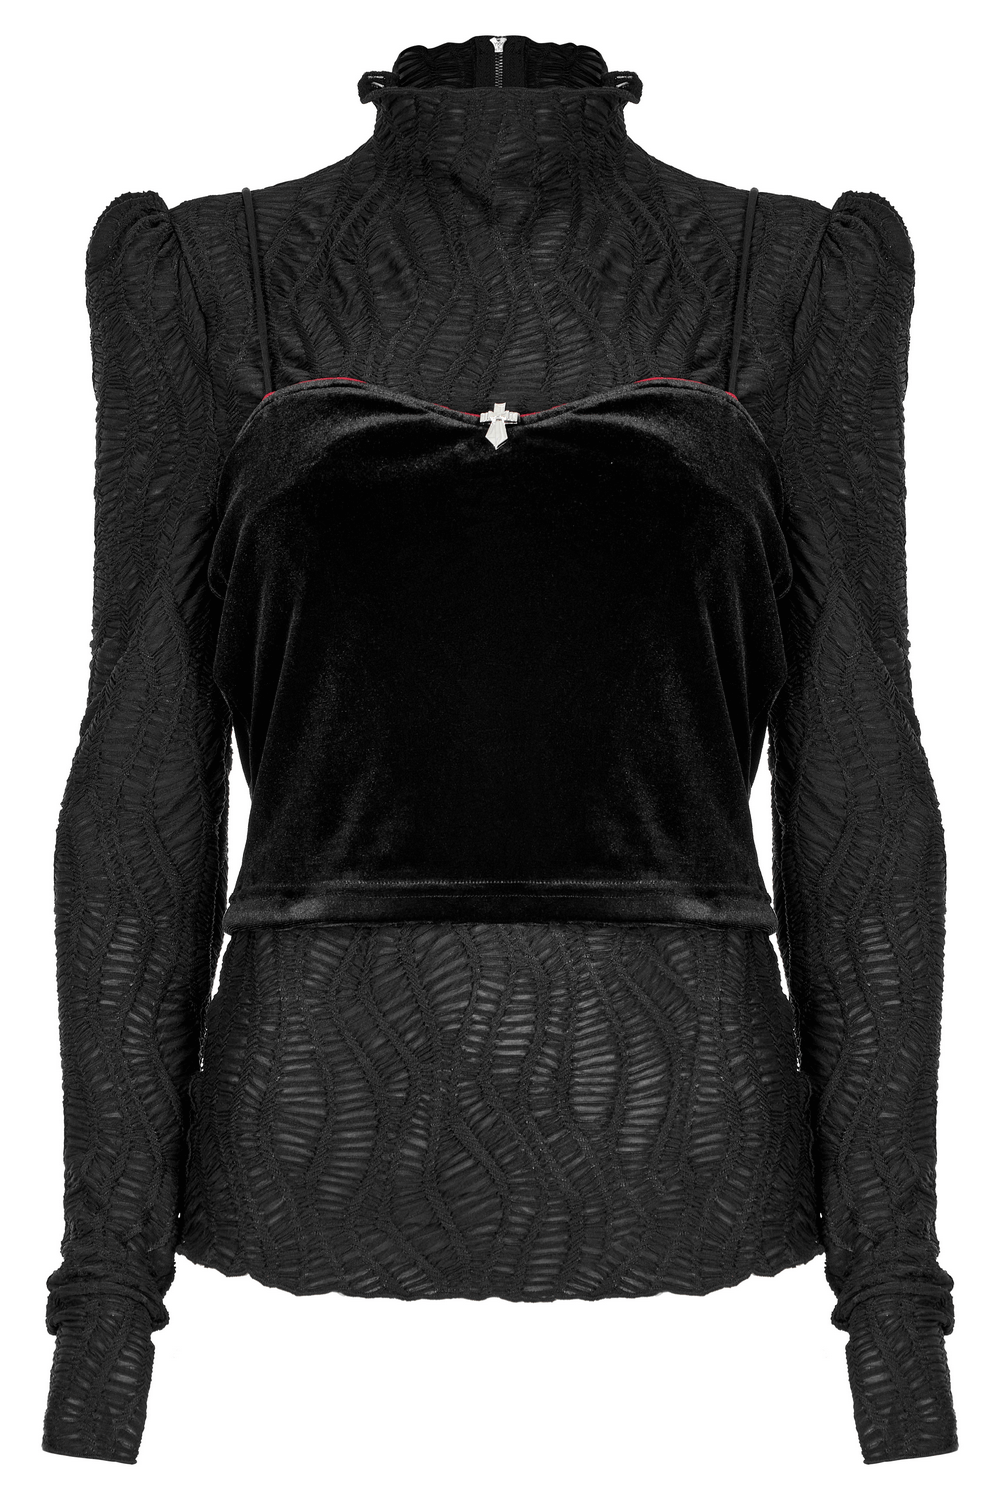 Elastic Wrinkled Two-Piece Gothic Long Sleeves Top